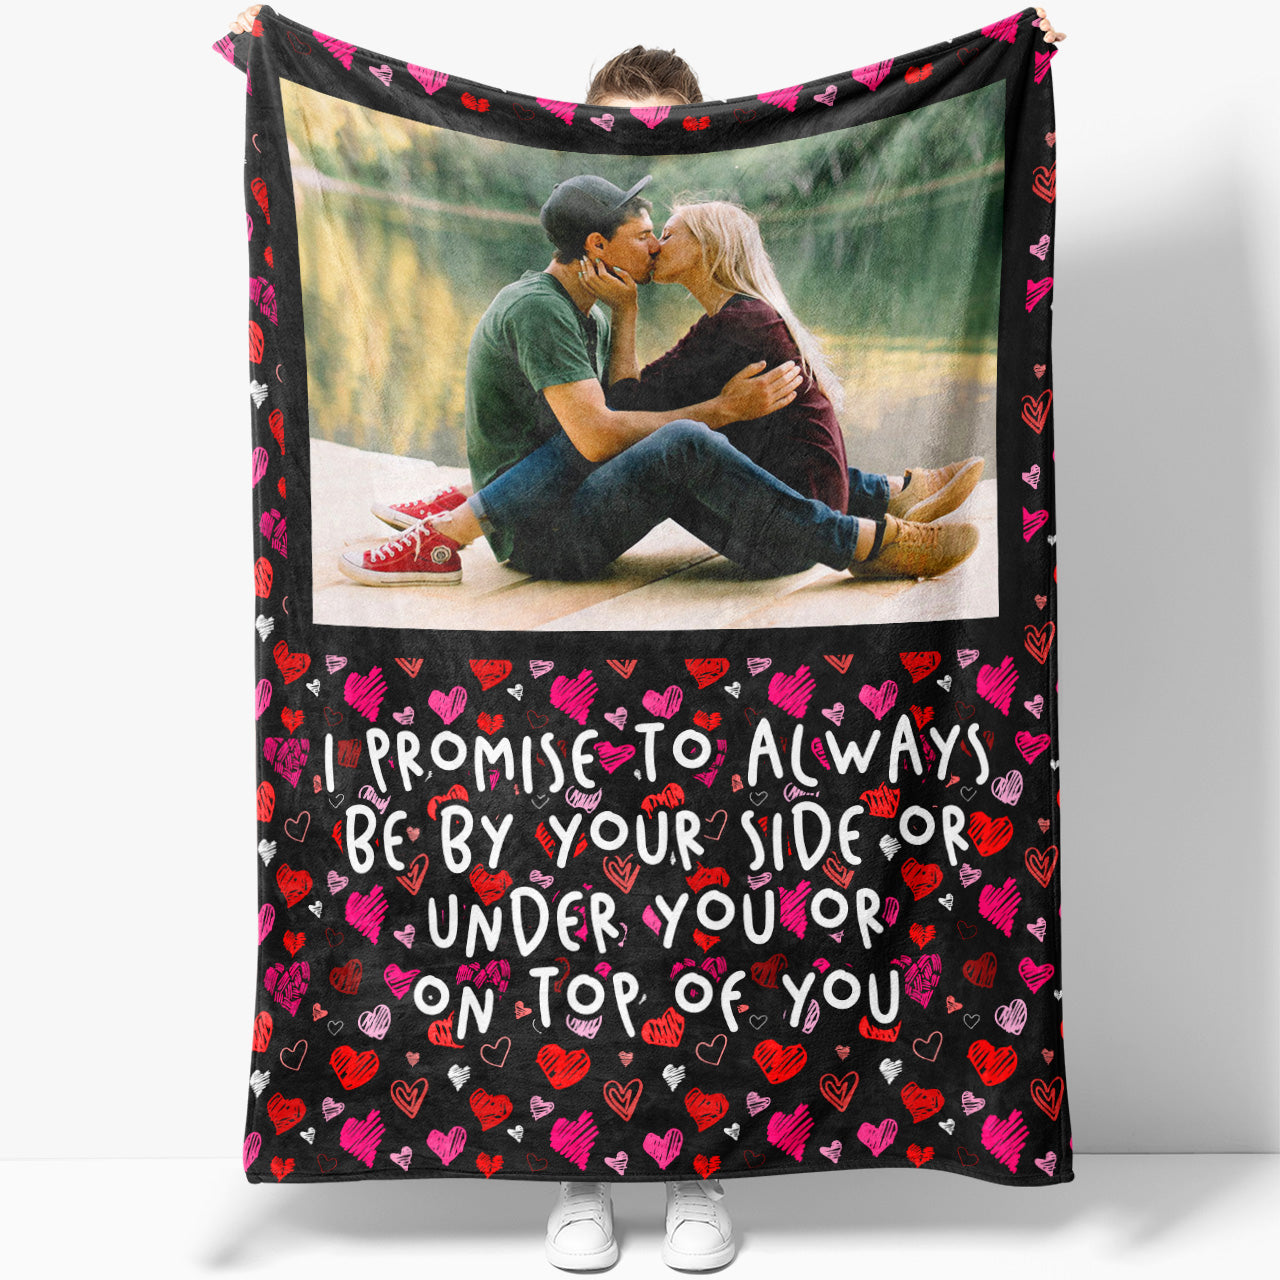 Blanket Gift Ideas For Her Him, Couple Custom Personalized Photo Blanket Gift